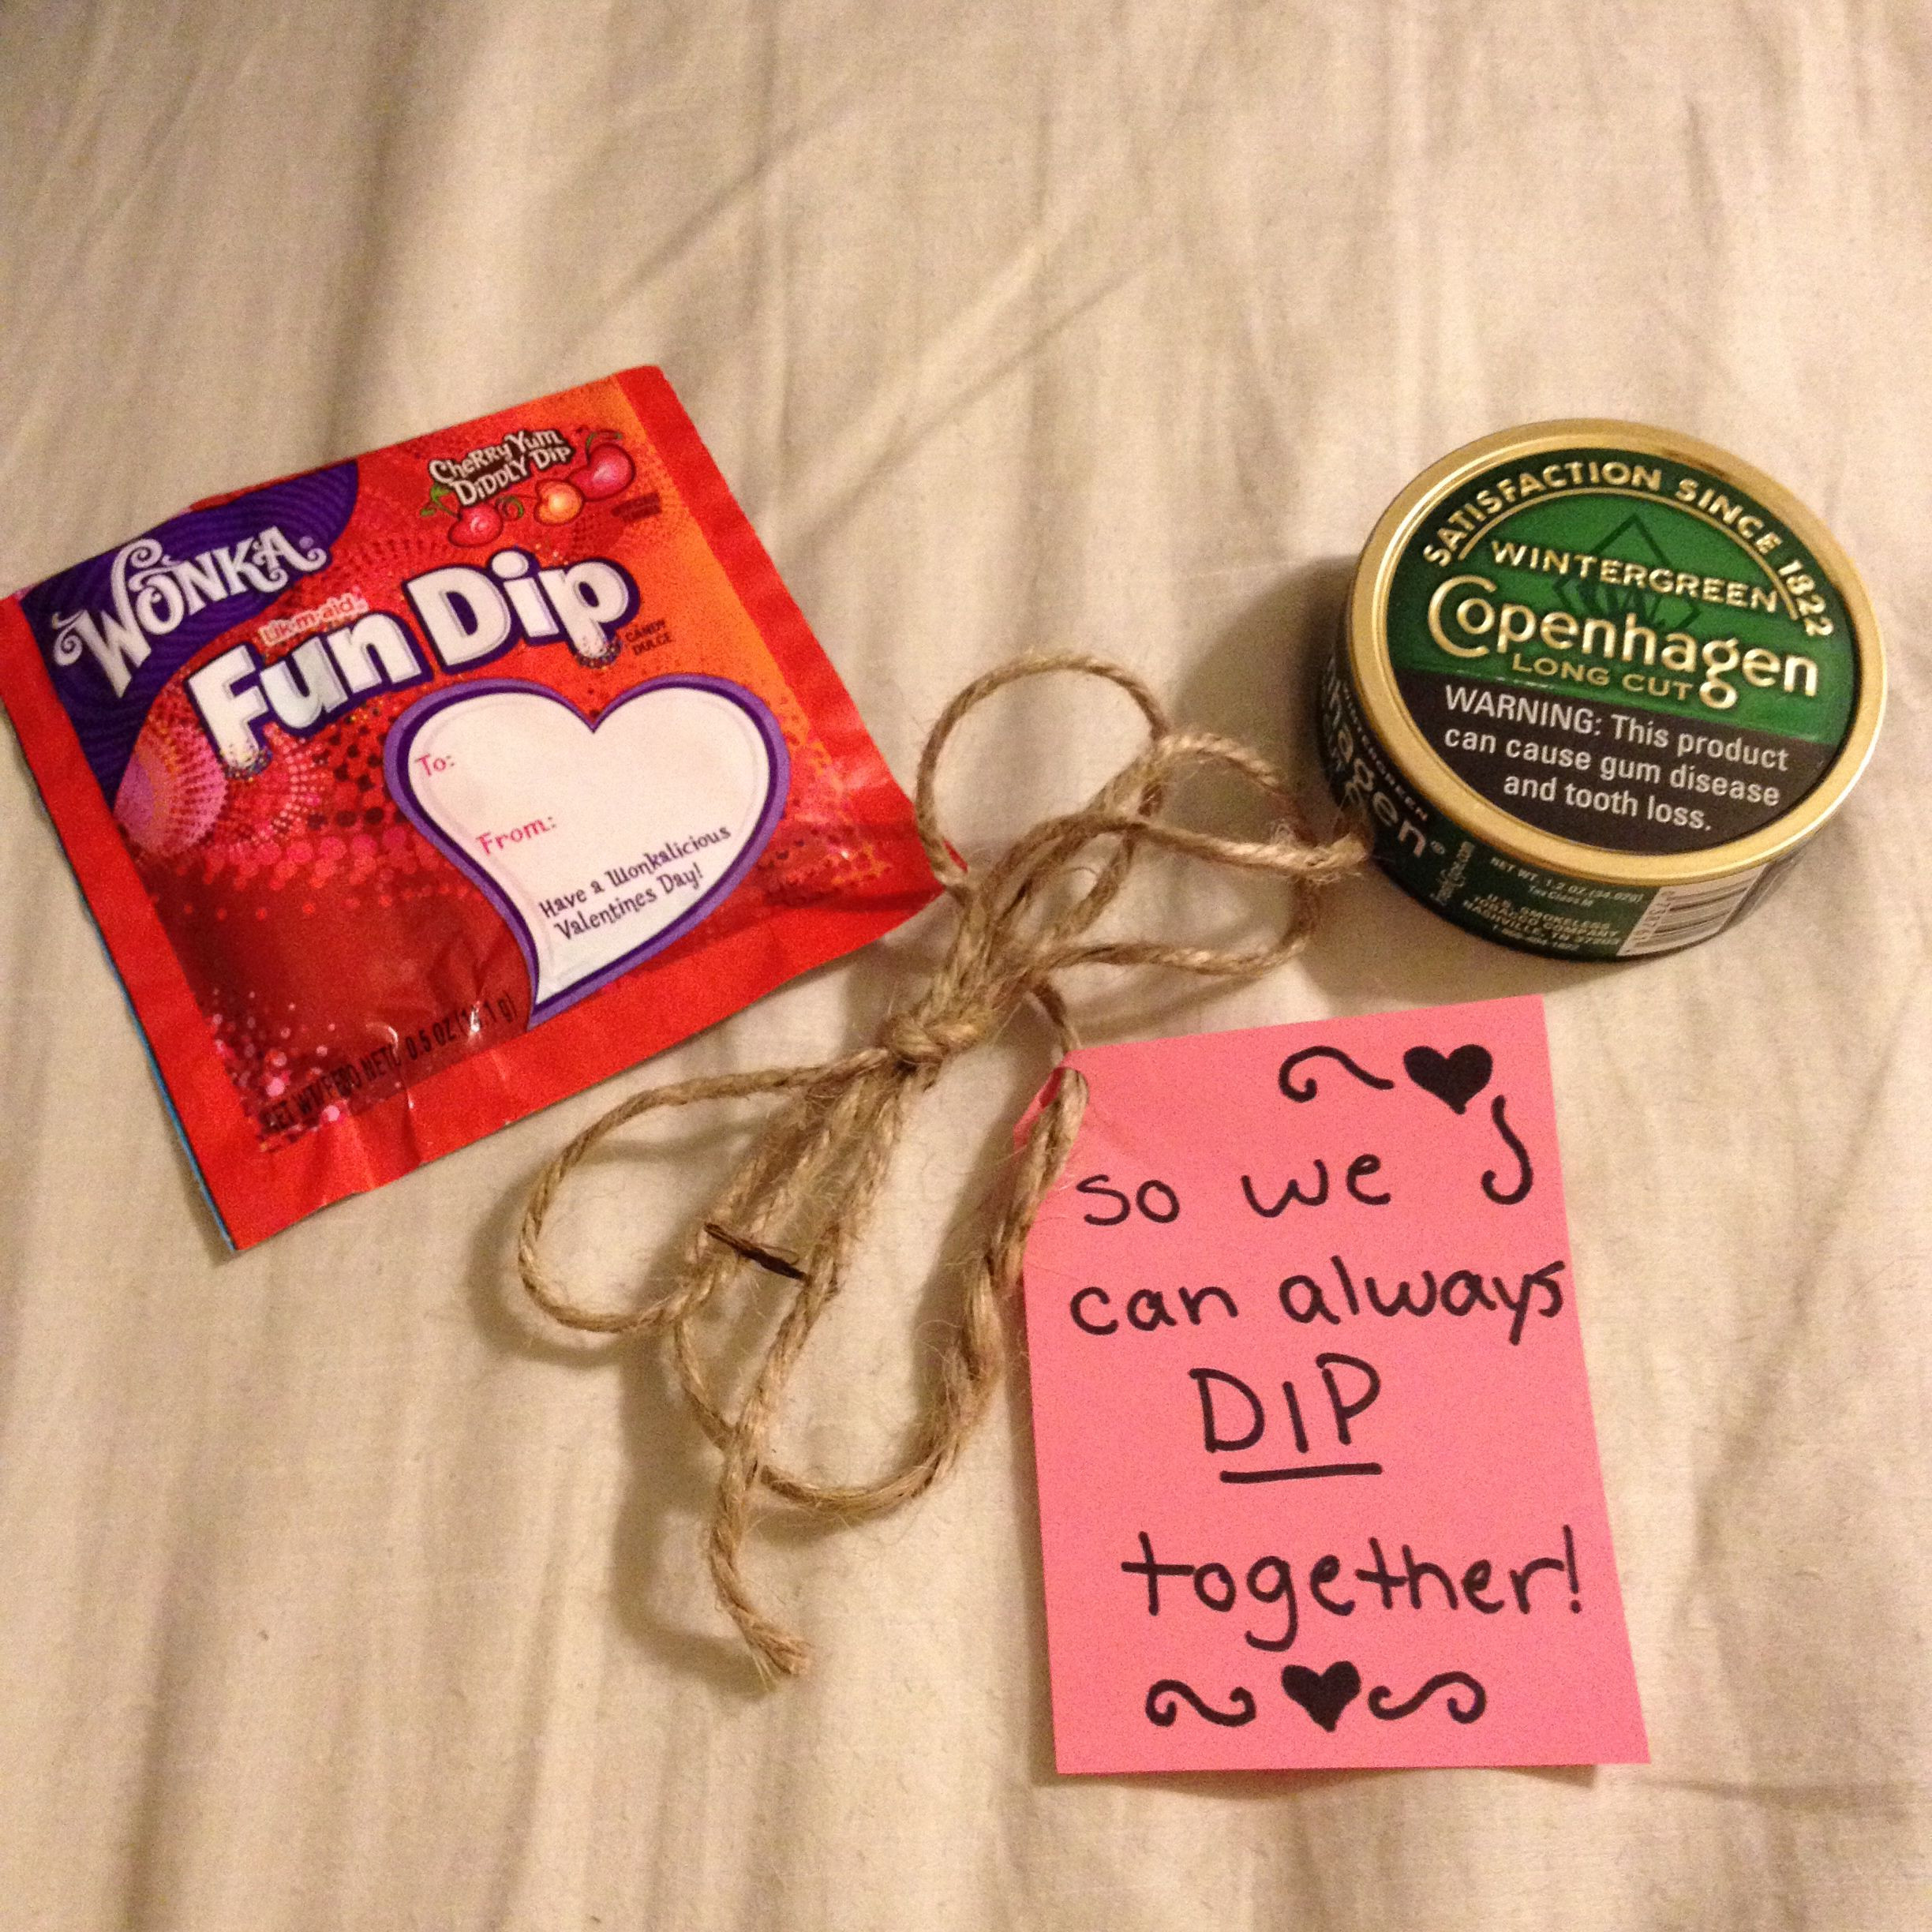 Funny Valentines Day Gifts For Boyfriend
 How to Make Easy Valentines Gifts for Him He ll Actually